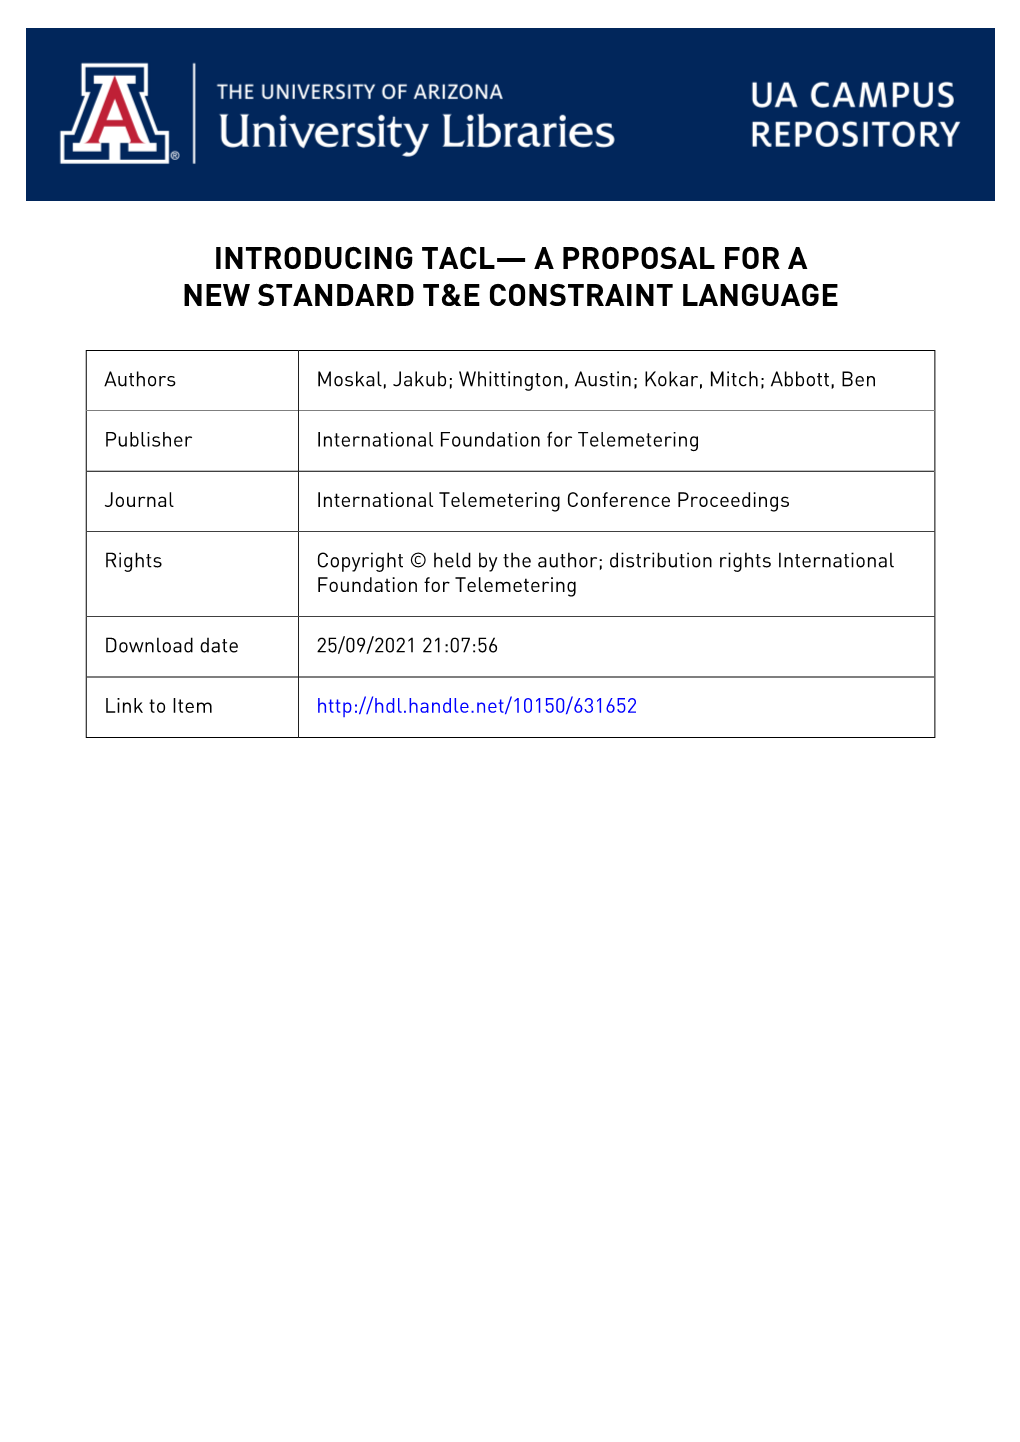 Introducing Tacl — a Proposal for a New Standard T&E Constraint Language